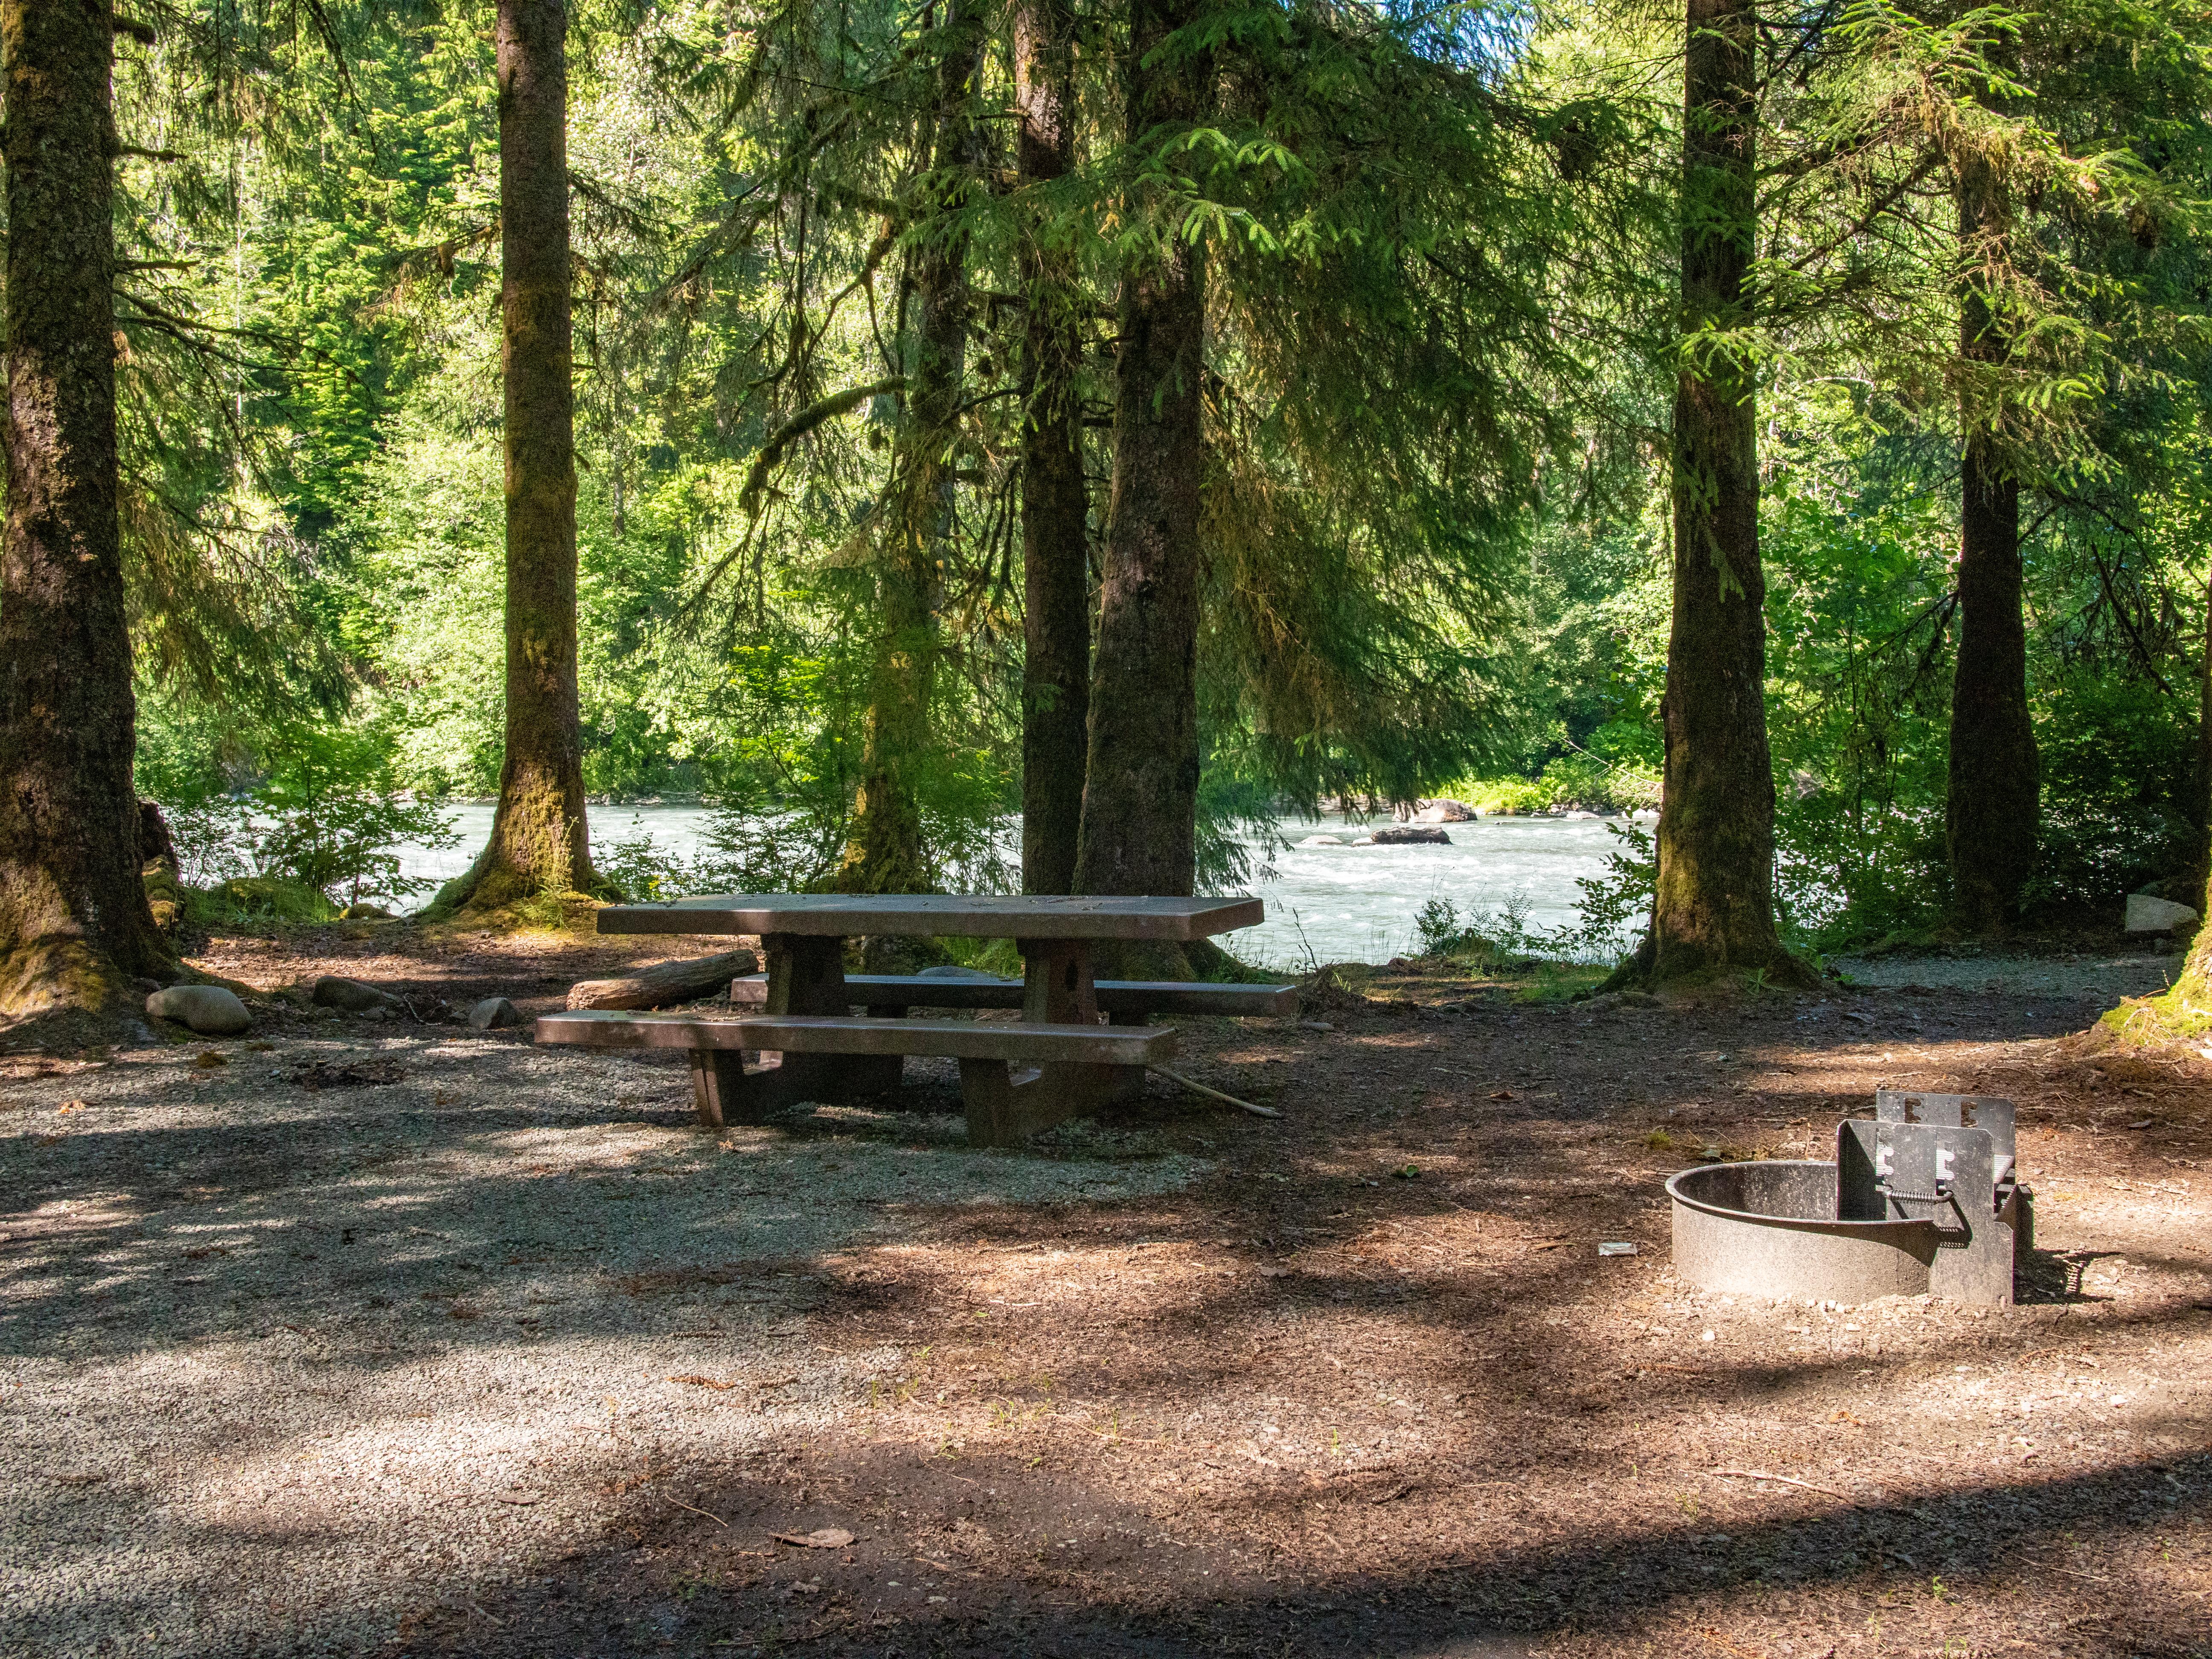 A campground with a fire pit and picnic tables among conifer trees, beside a rushing river.